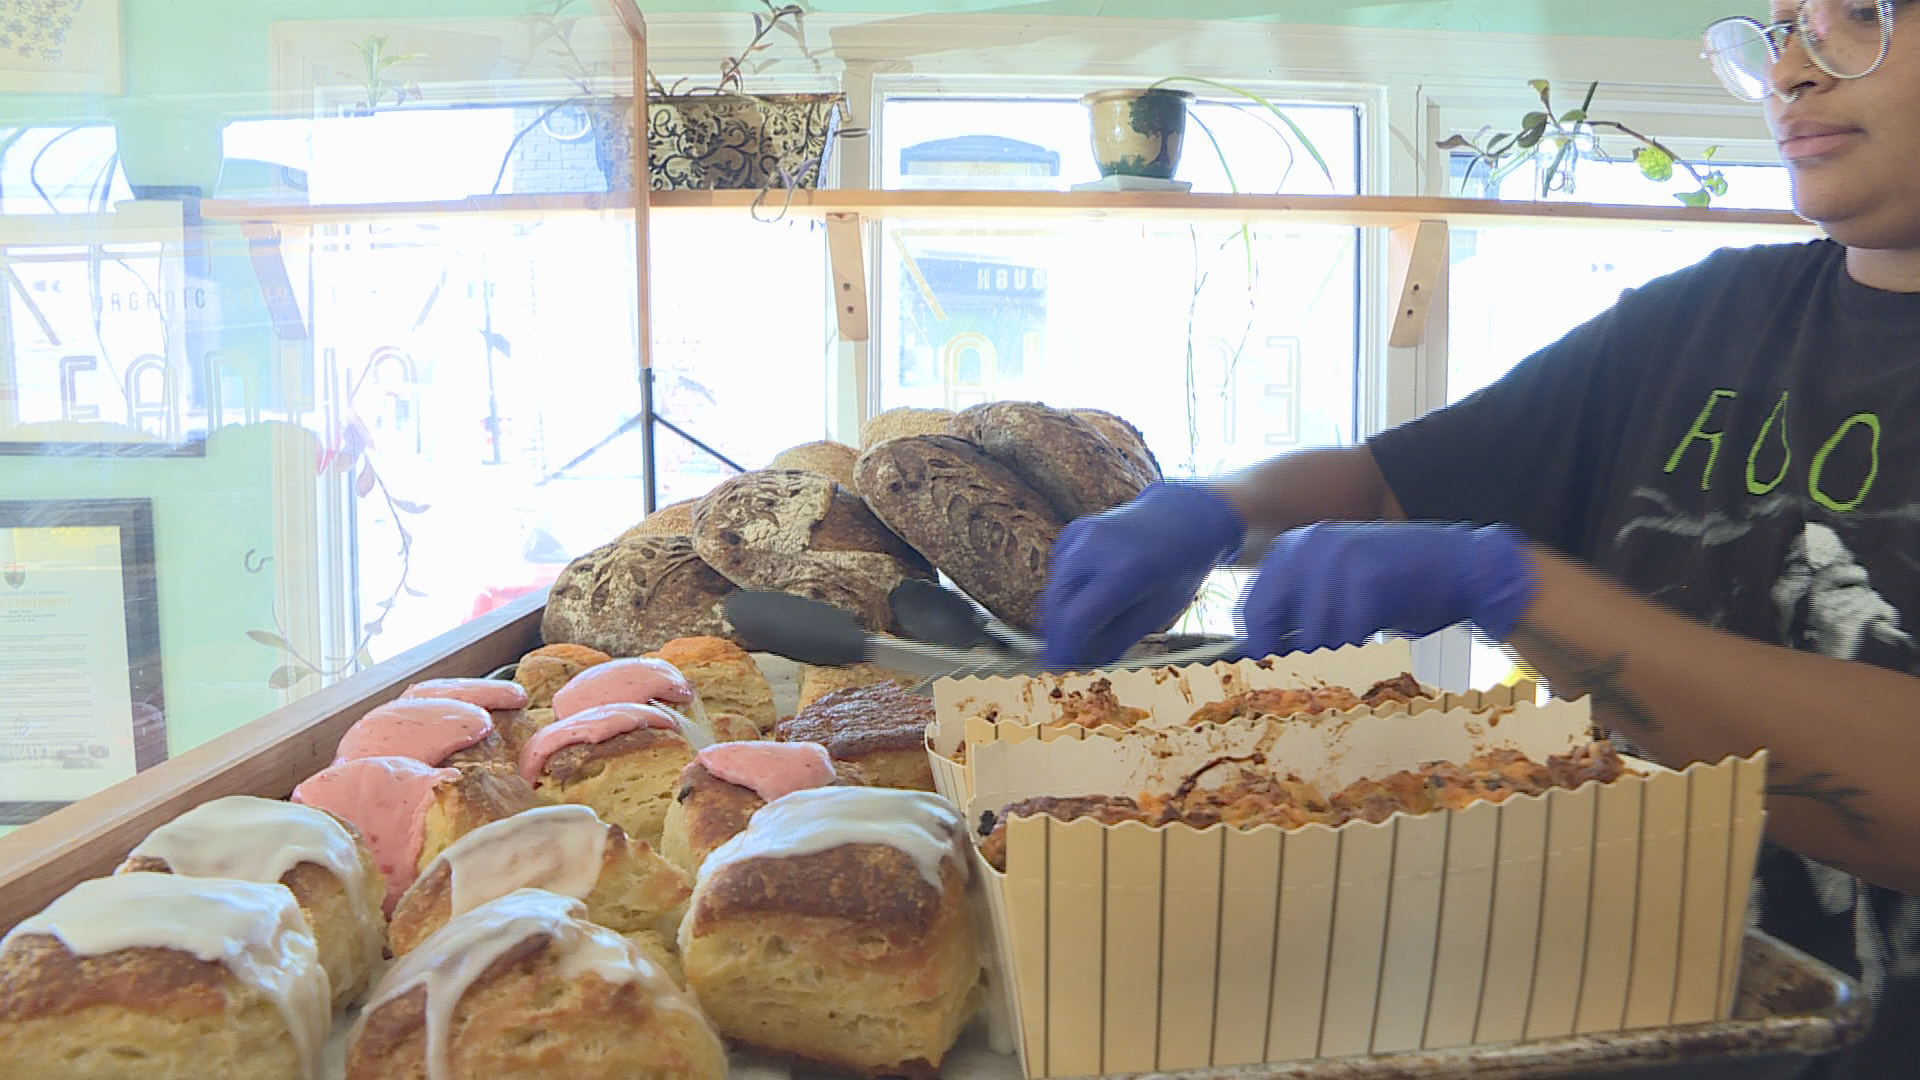 Tamika Krush, an employee at the bakery rearranges, the store’s front display.